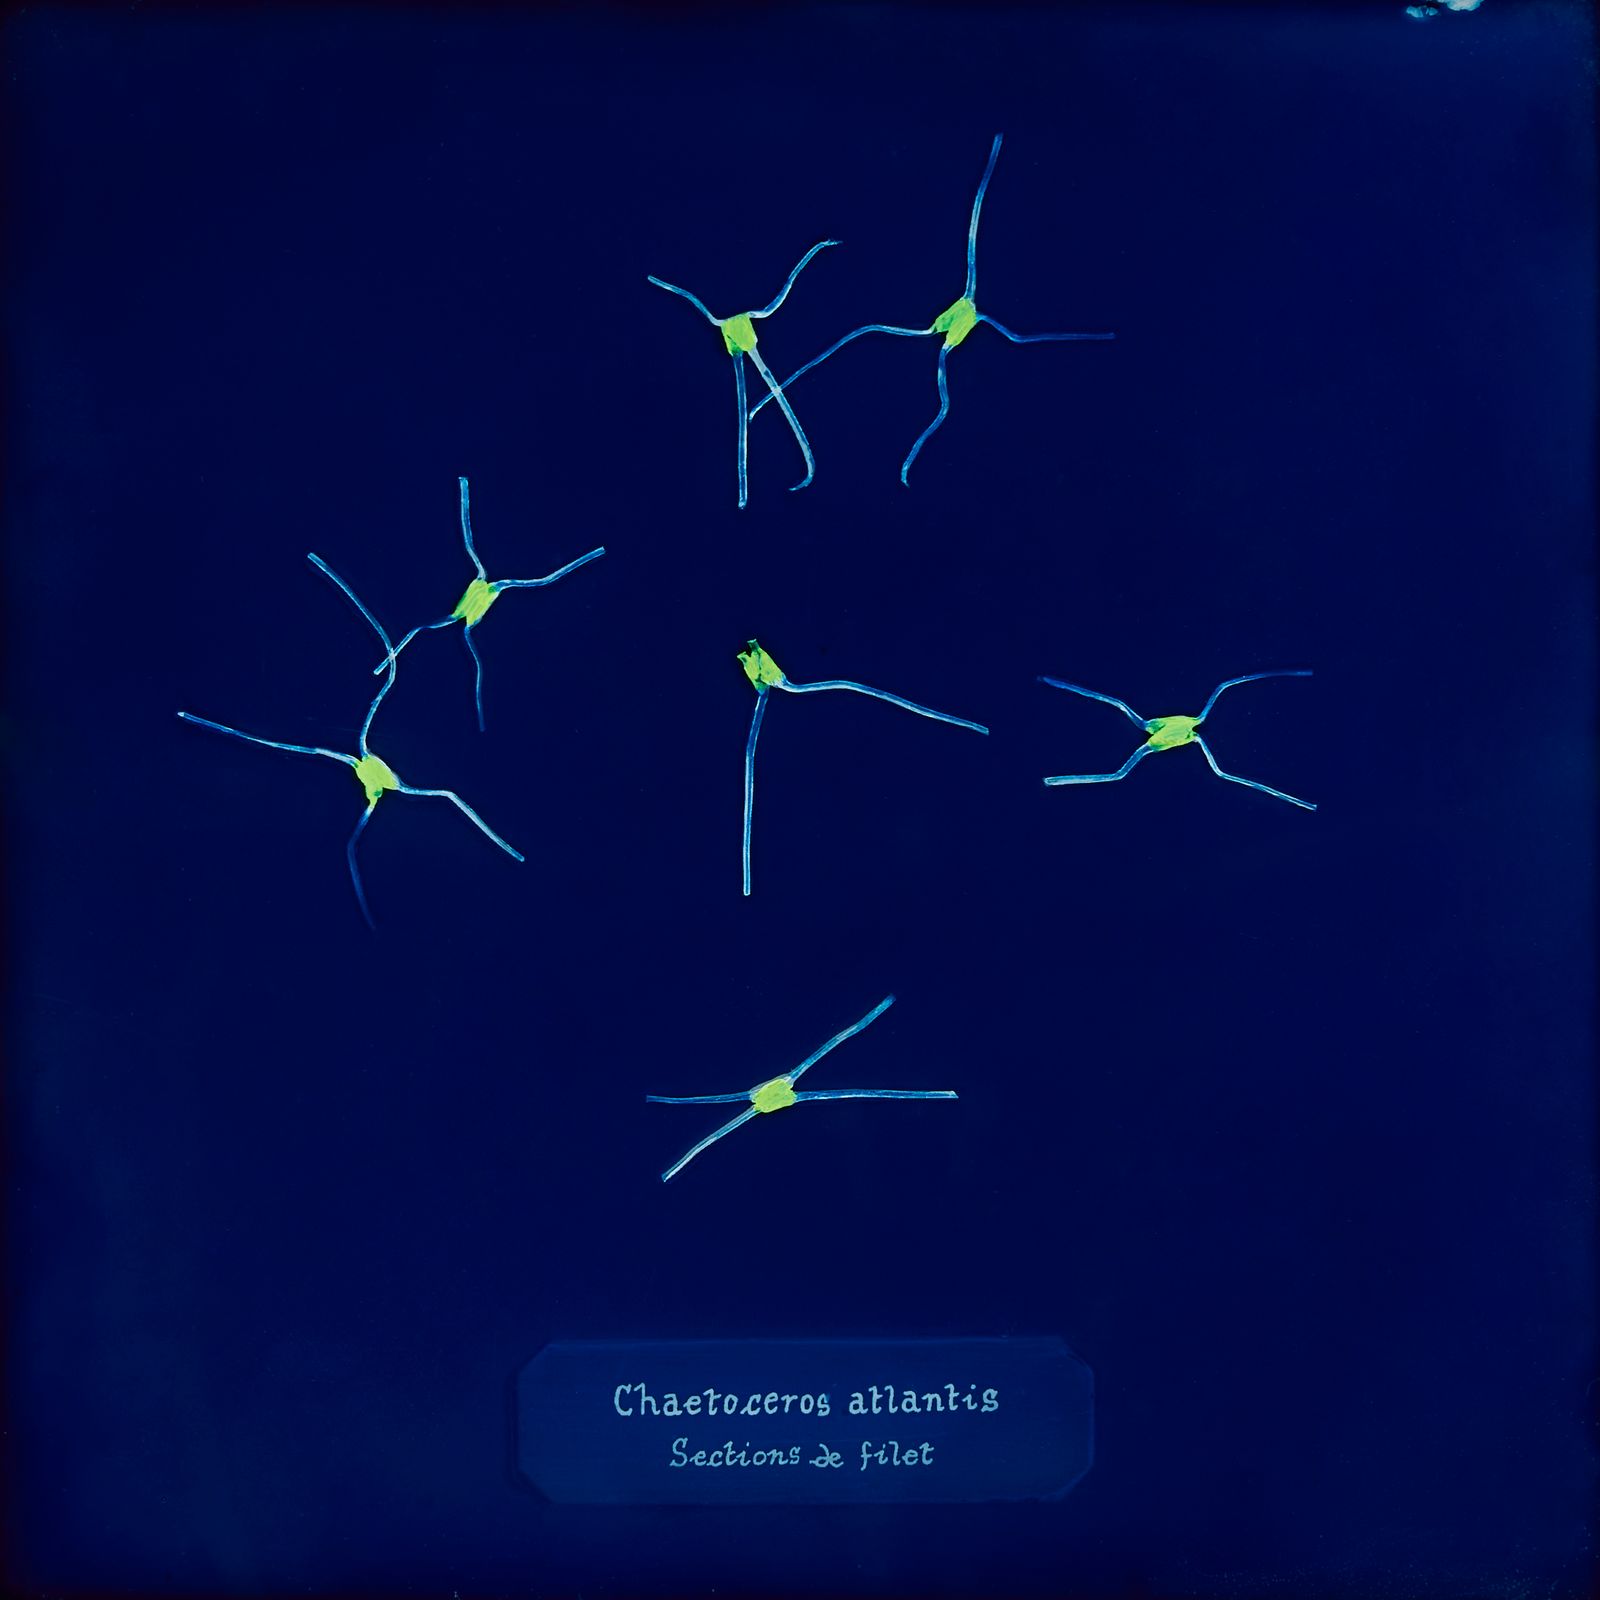 © Manon Lanjouère - Chaetoceros atlantis, Net sections, Cyanotype on glass and fluorescent vynil emulsion, 20x20 cm